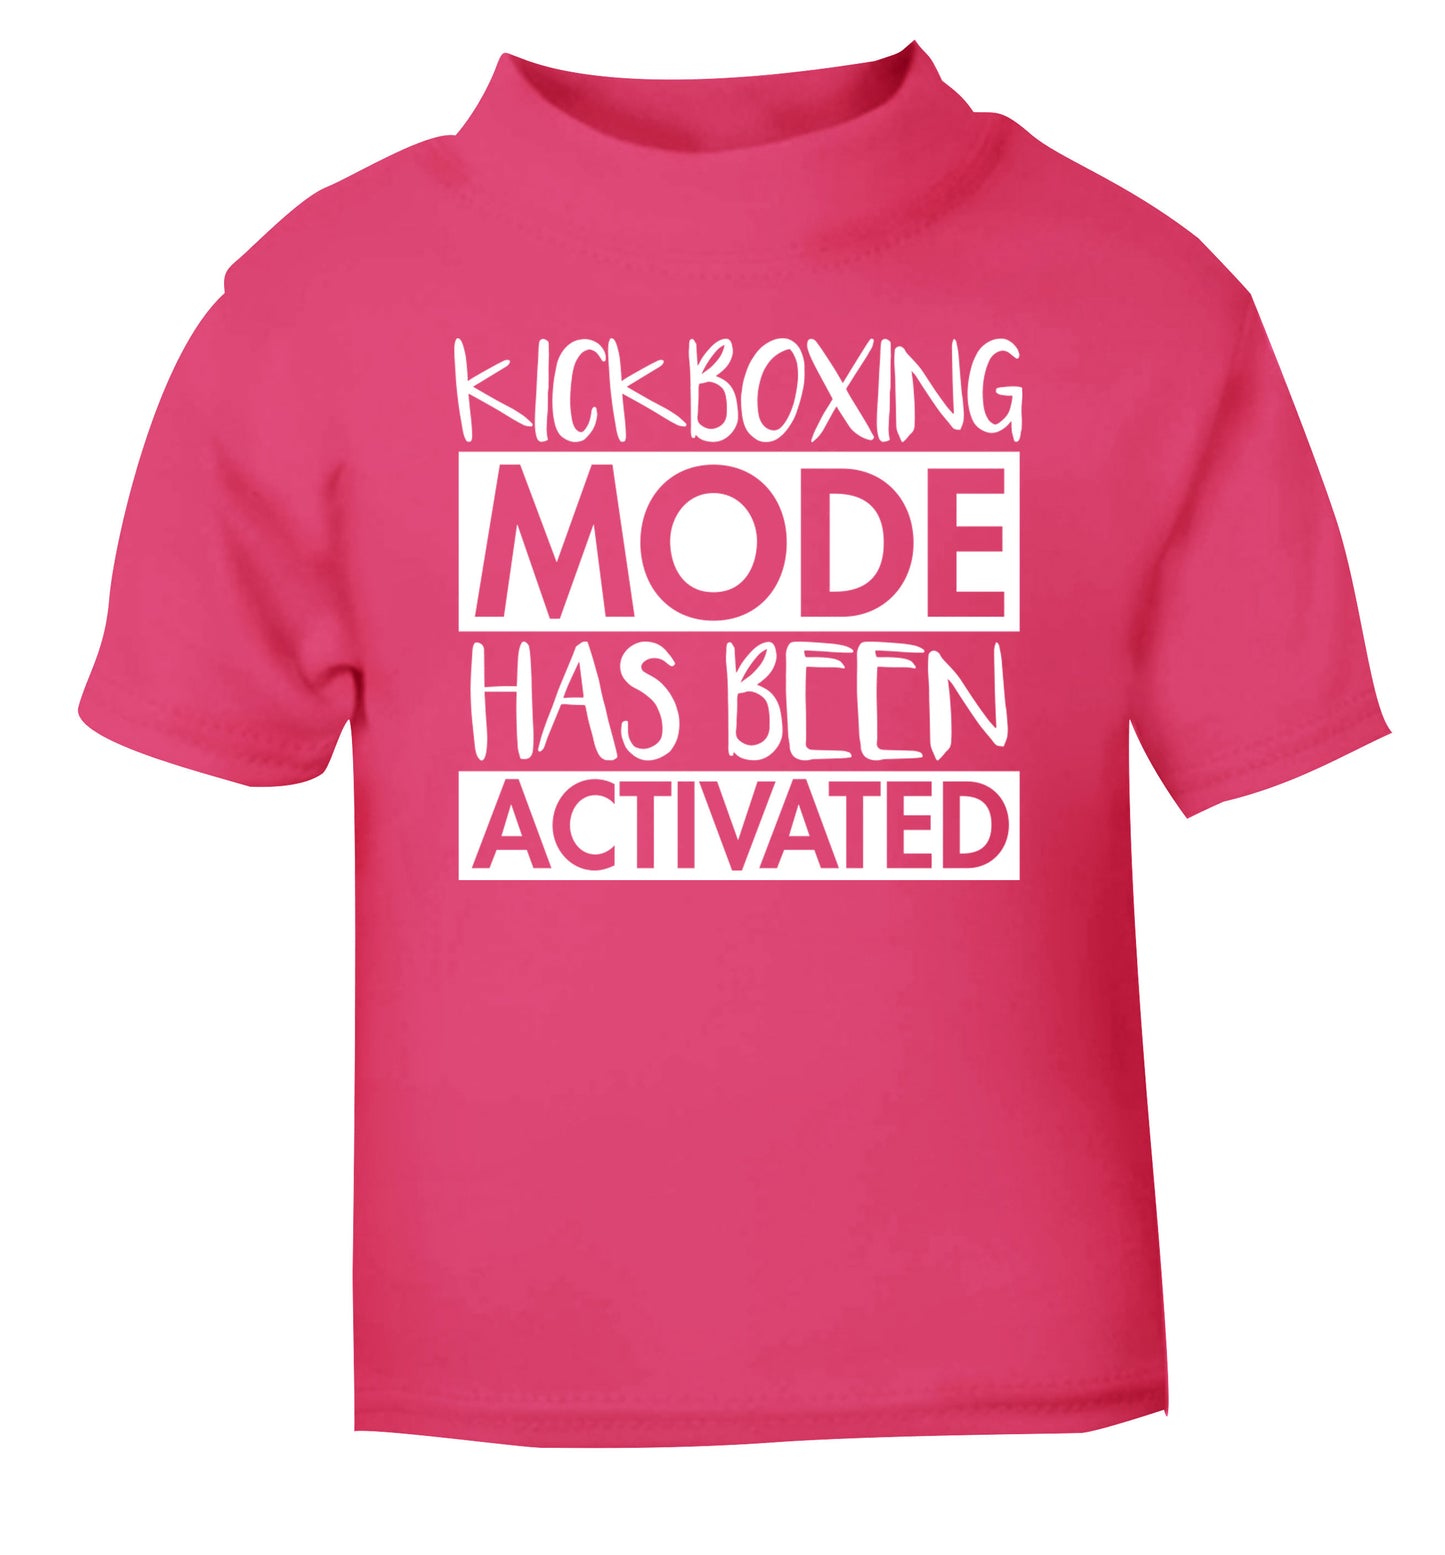 Kickboxing mode activated pink Baby Toddler Tshirt 2 Years